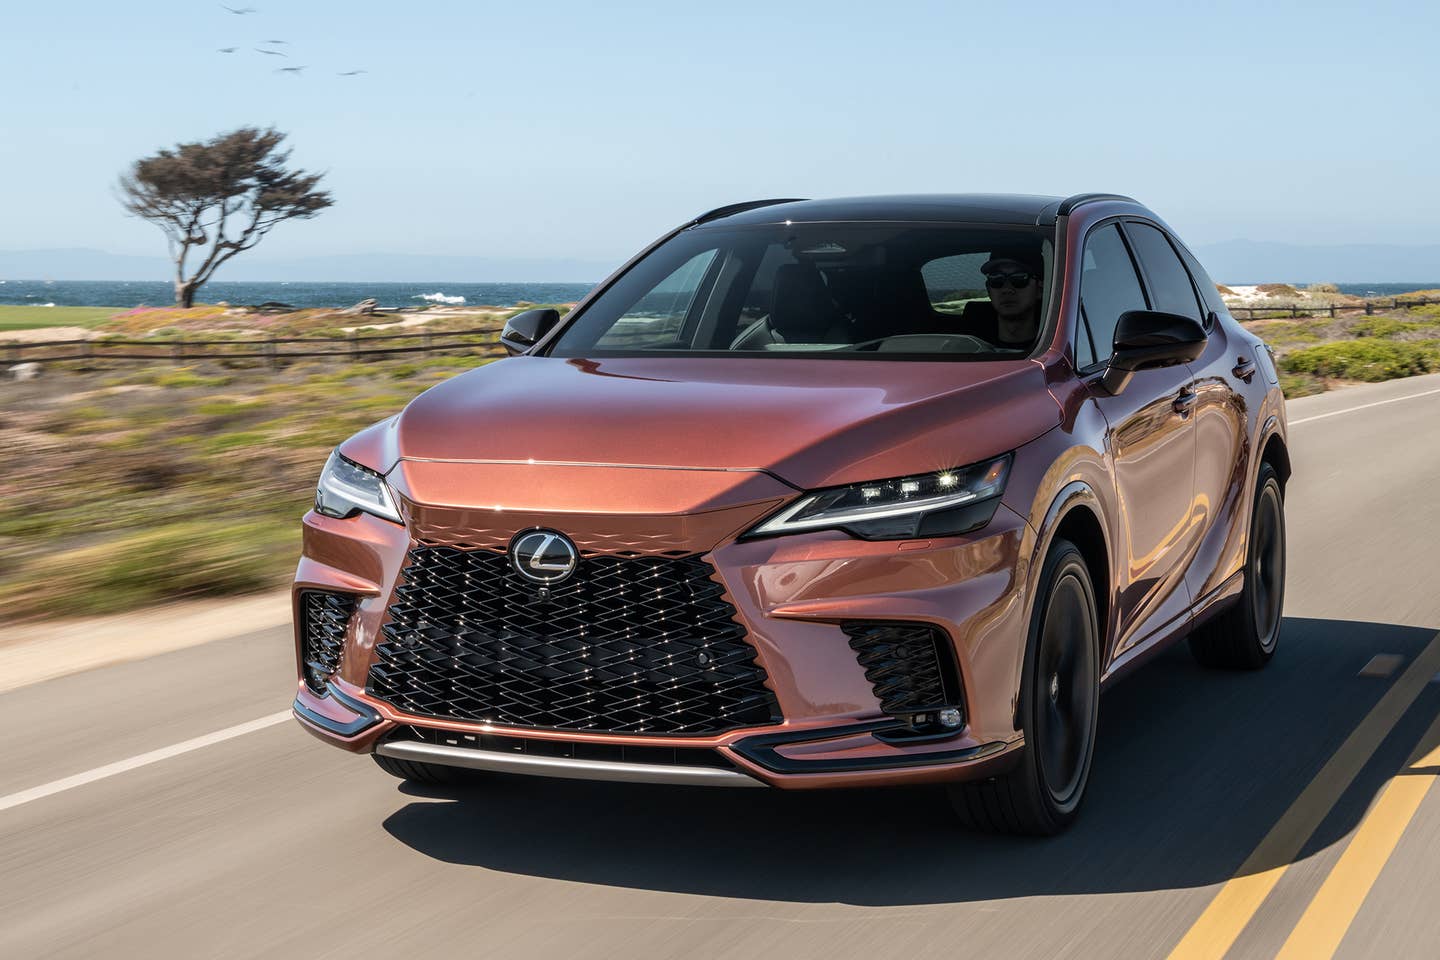 The RX 500h F Sport in Copper Crest, which is a new color. <em>Lexus</em>